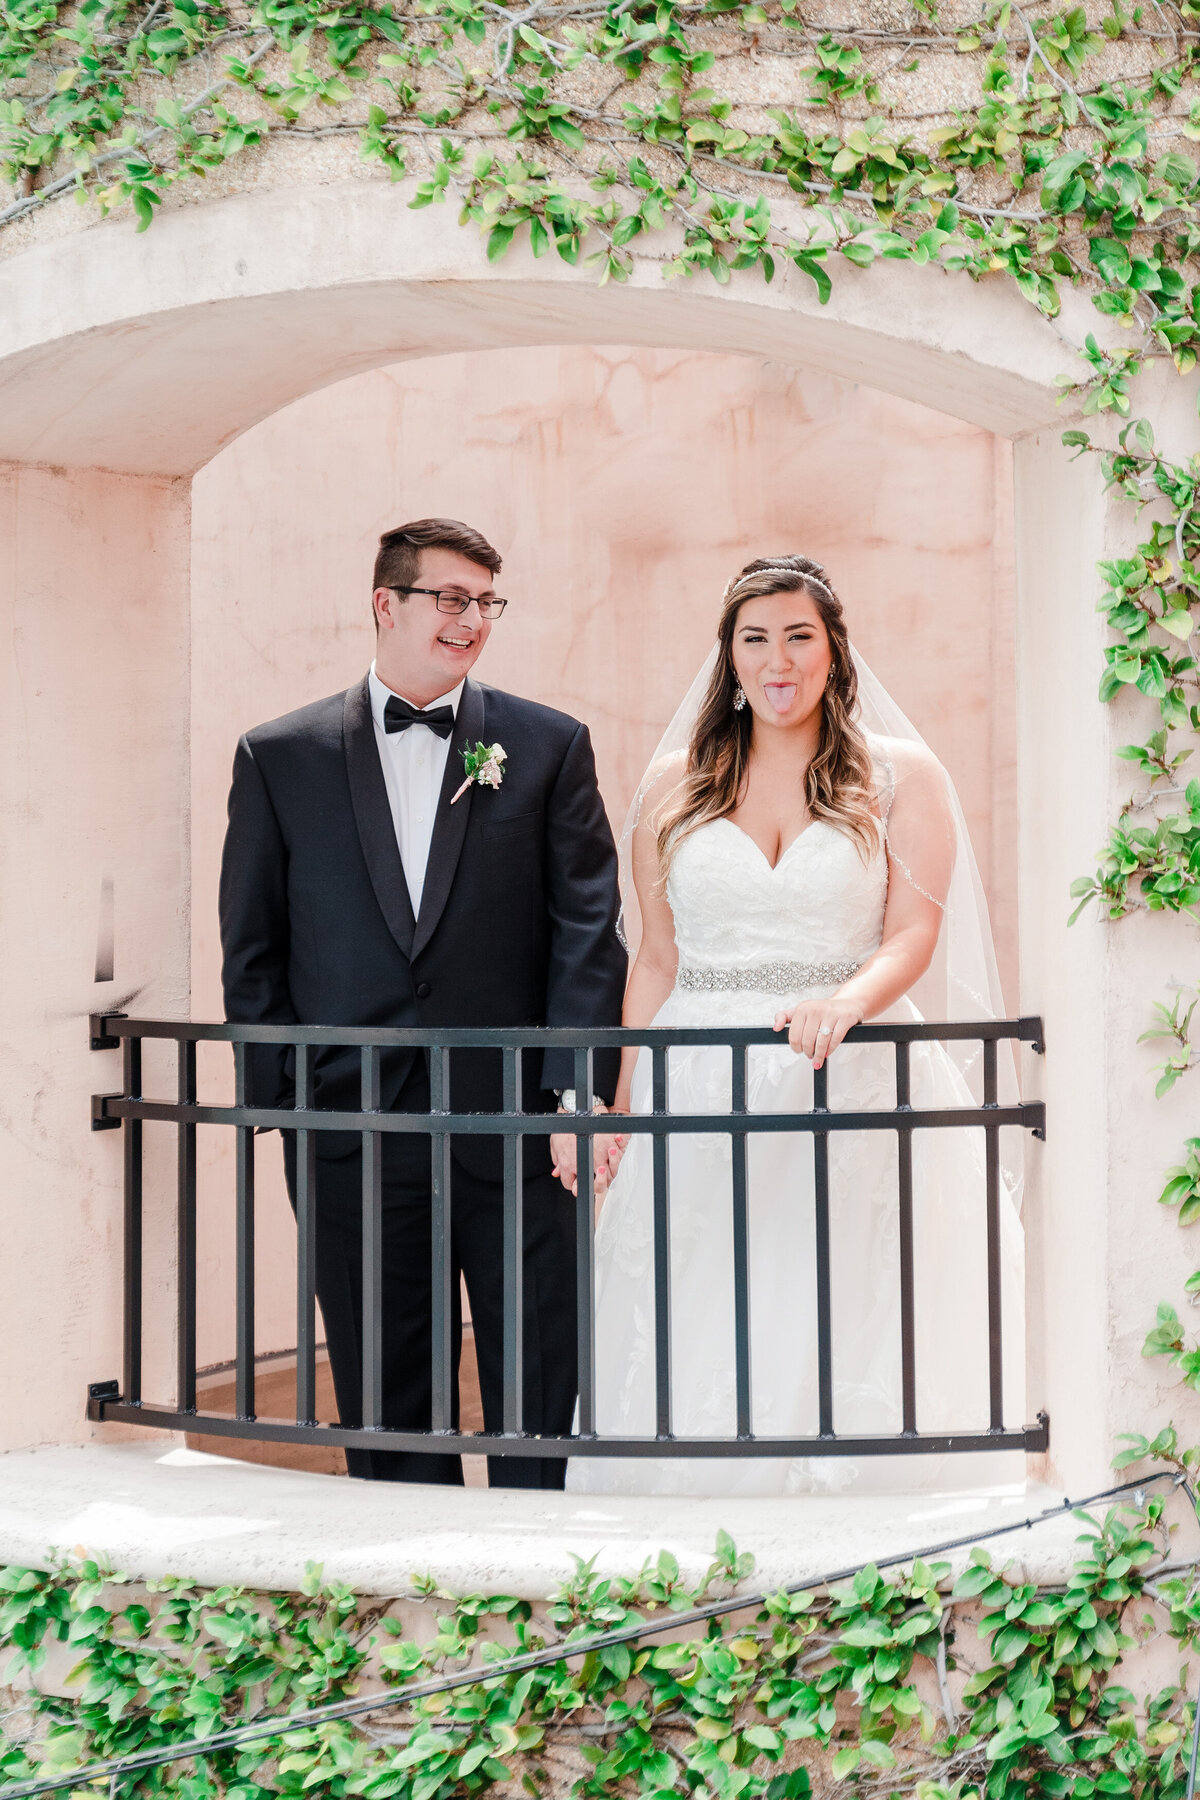 Playful wedding photography and videography in Orlando Florida